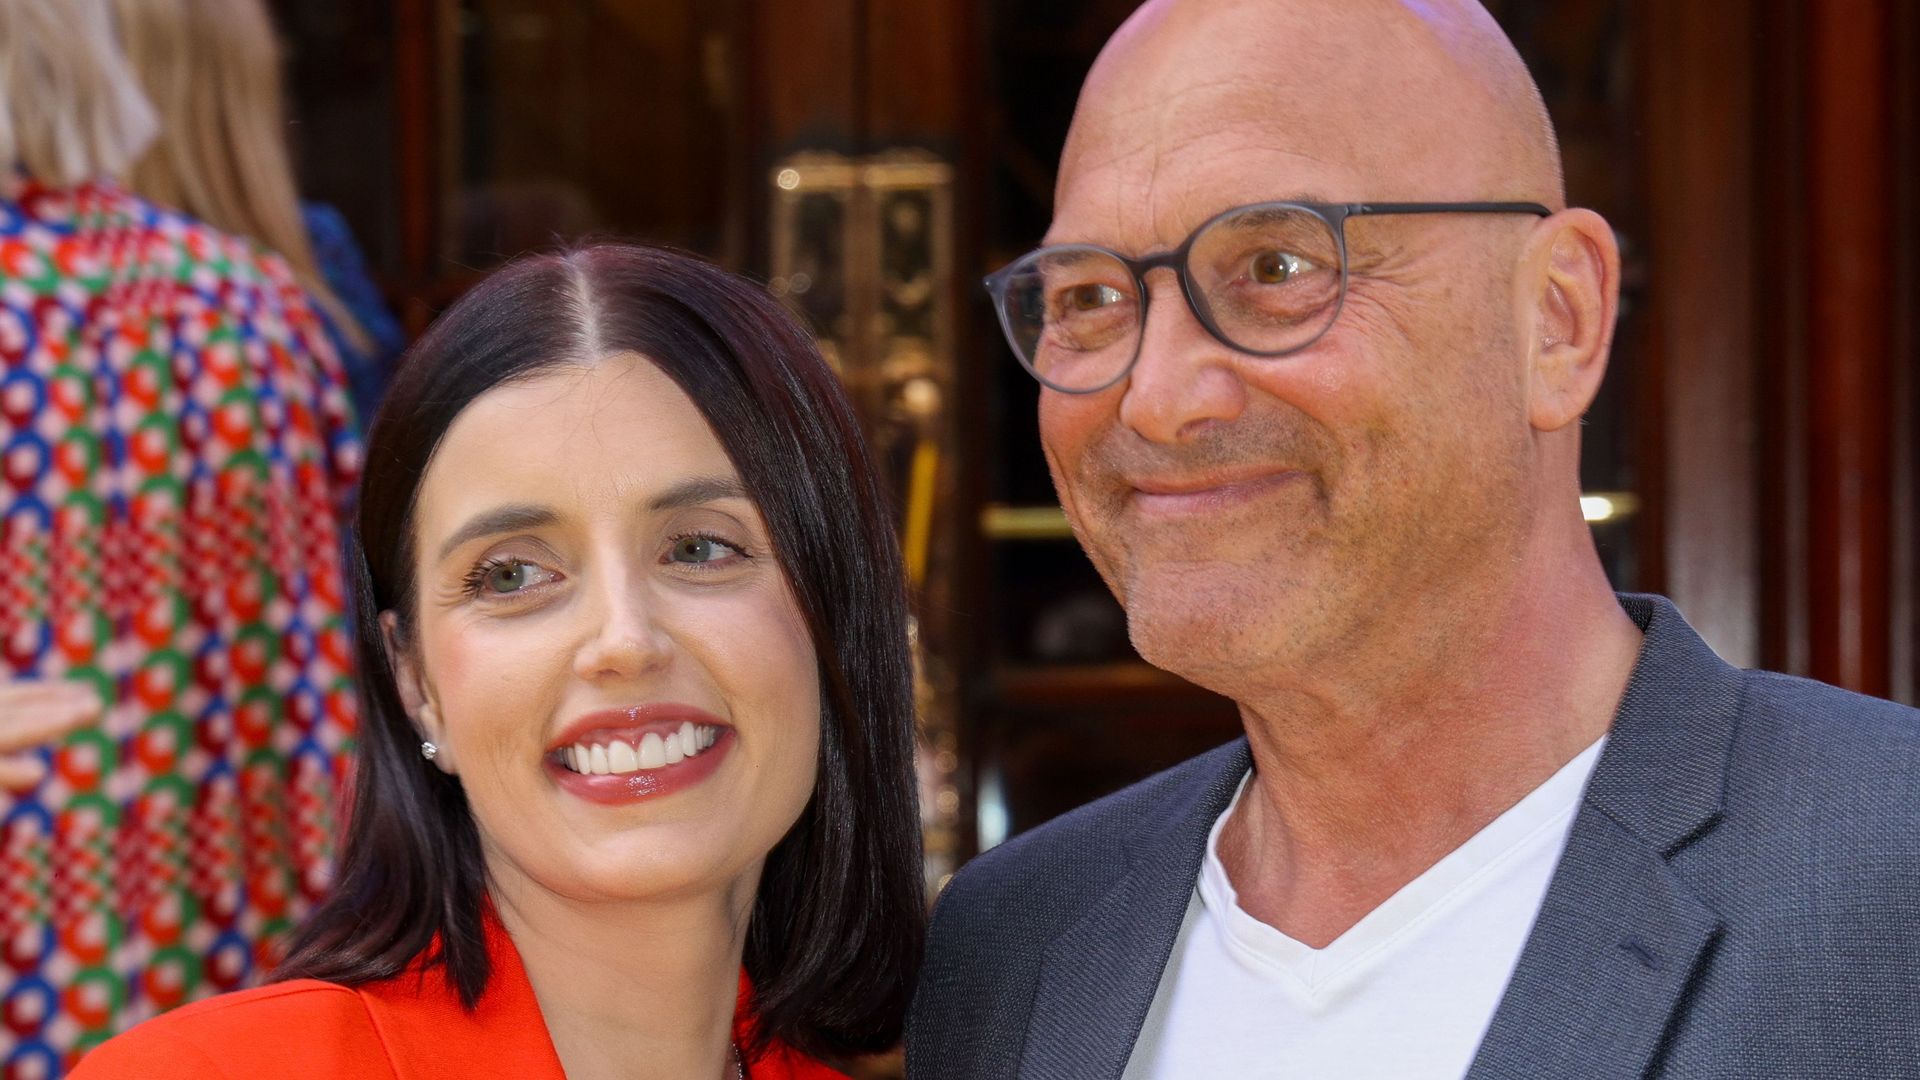 Gregg Wallace in a grey suit with Anne-Marie in a red jacket